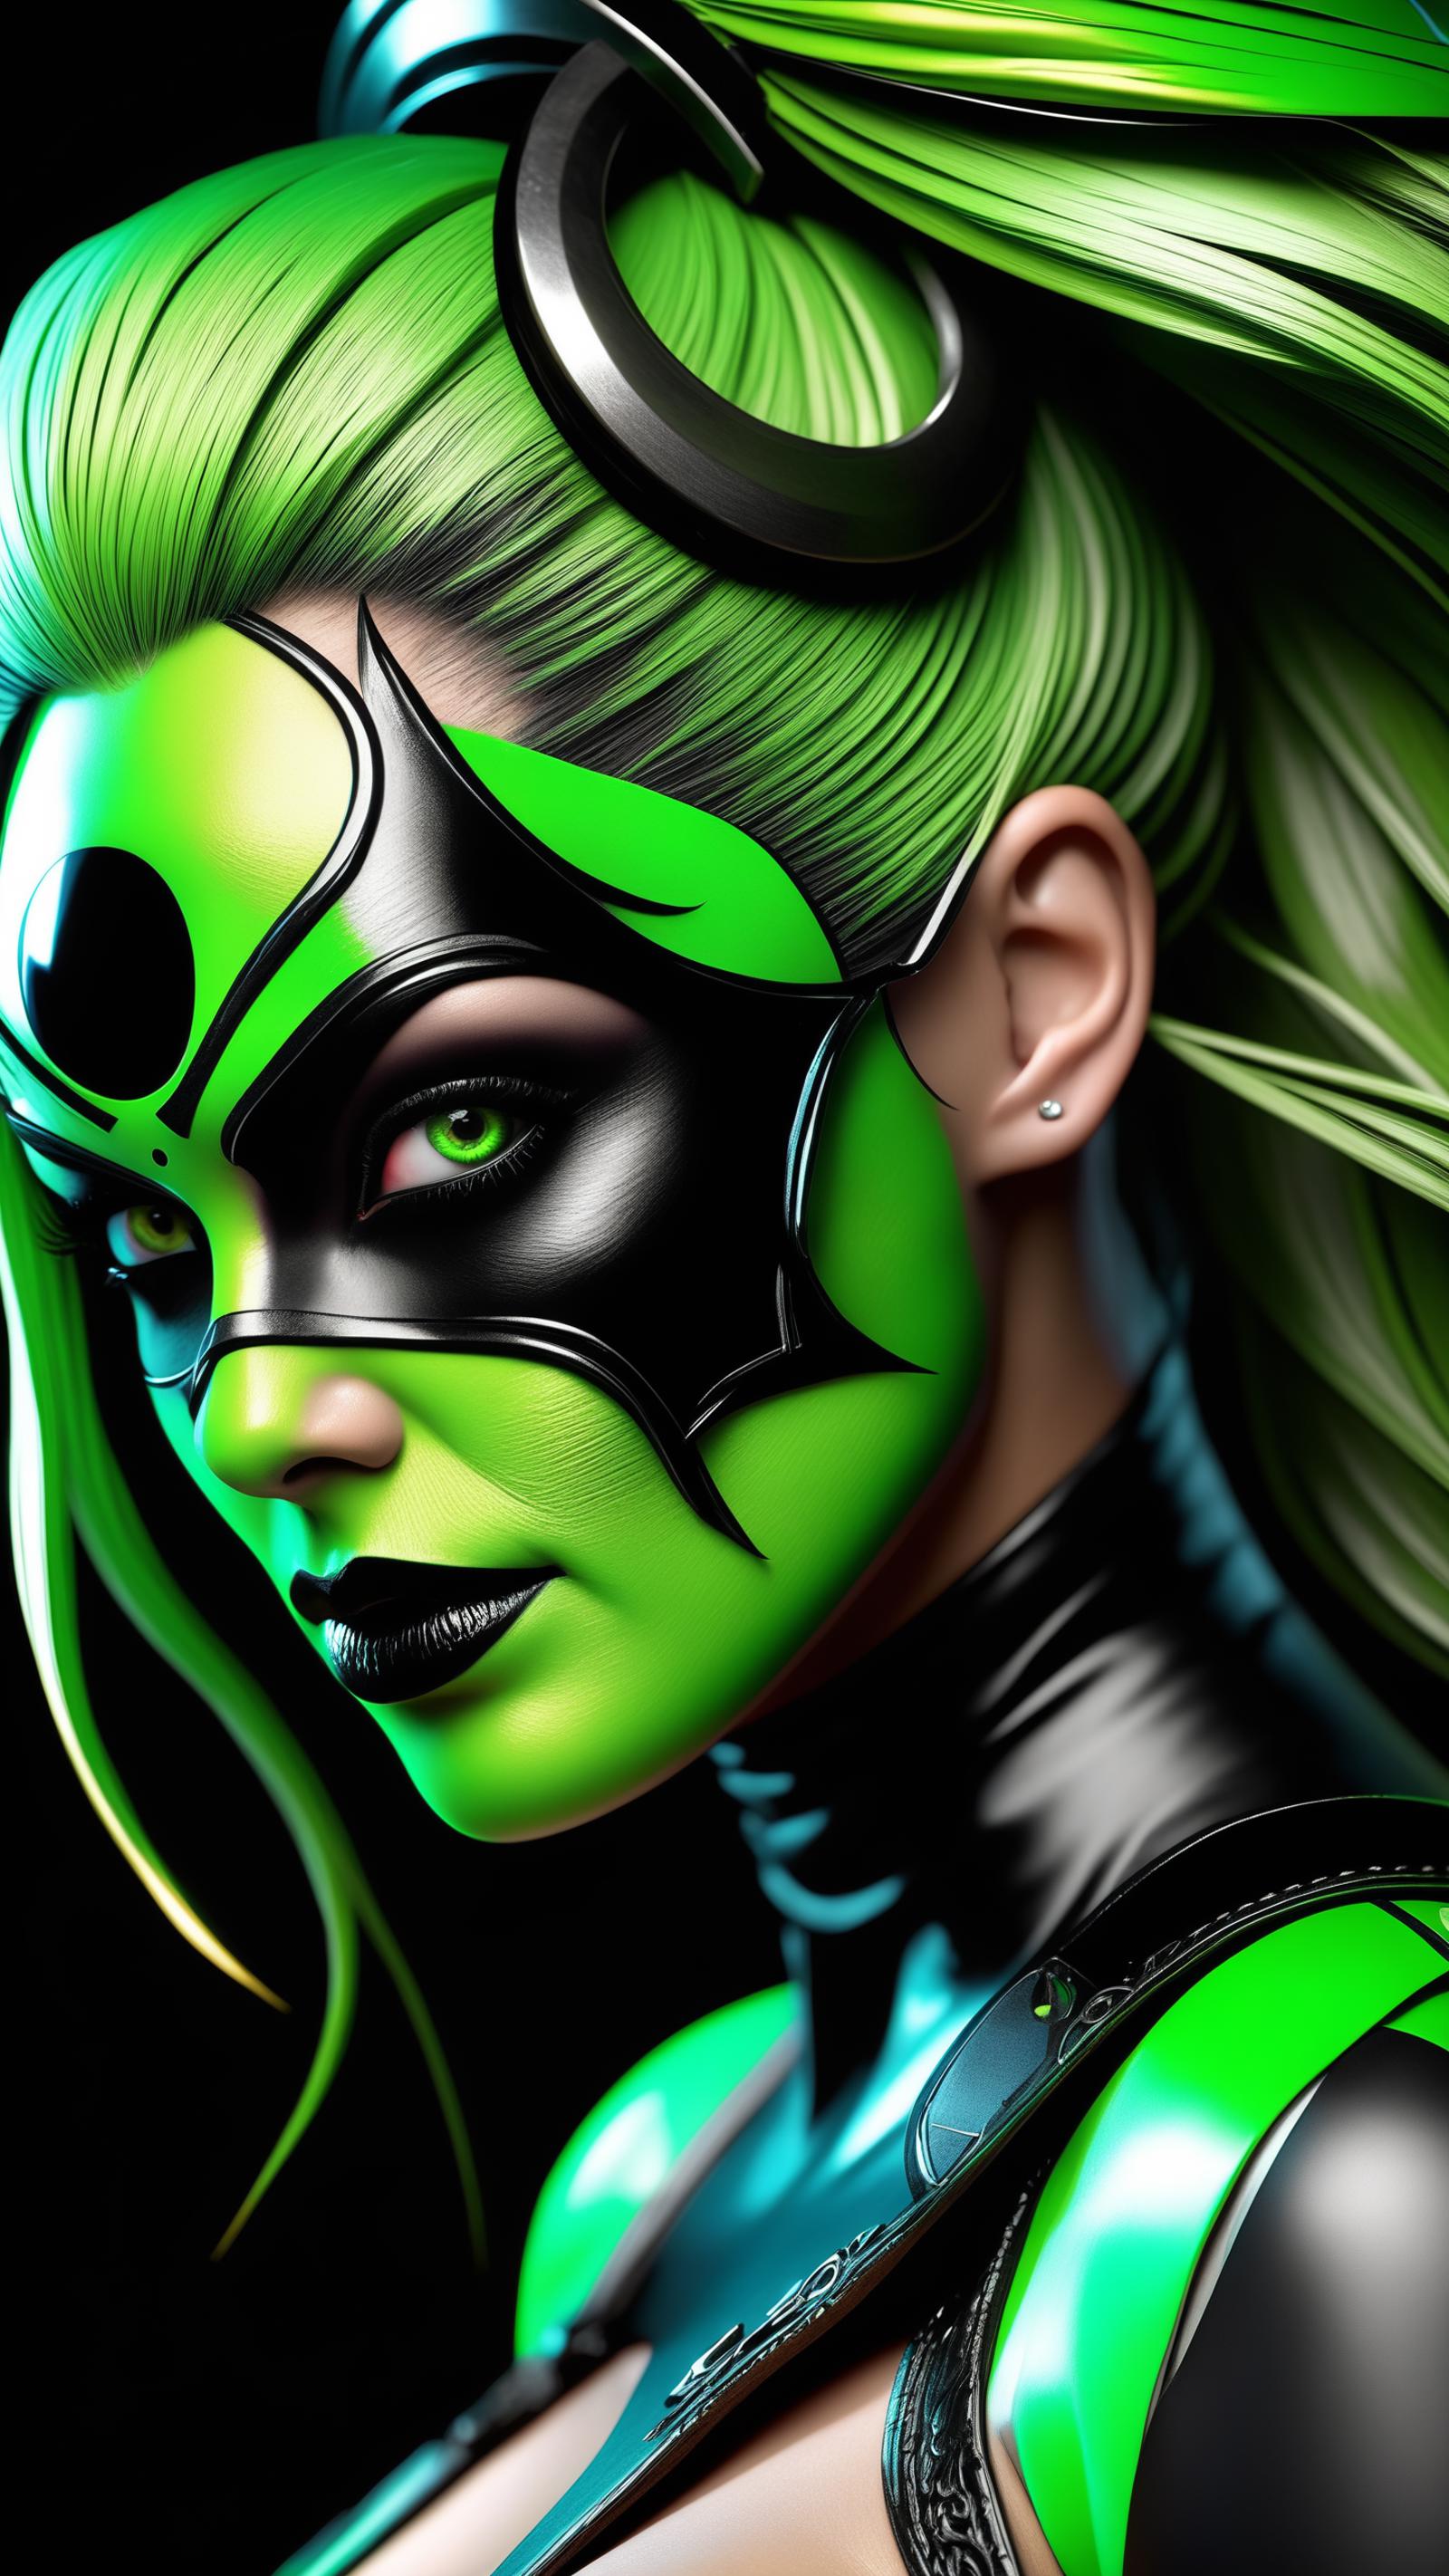 A digital art image of a woman with green makeup on her face and wearing black lipstick.